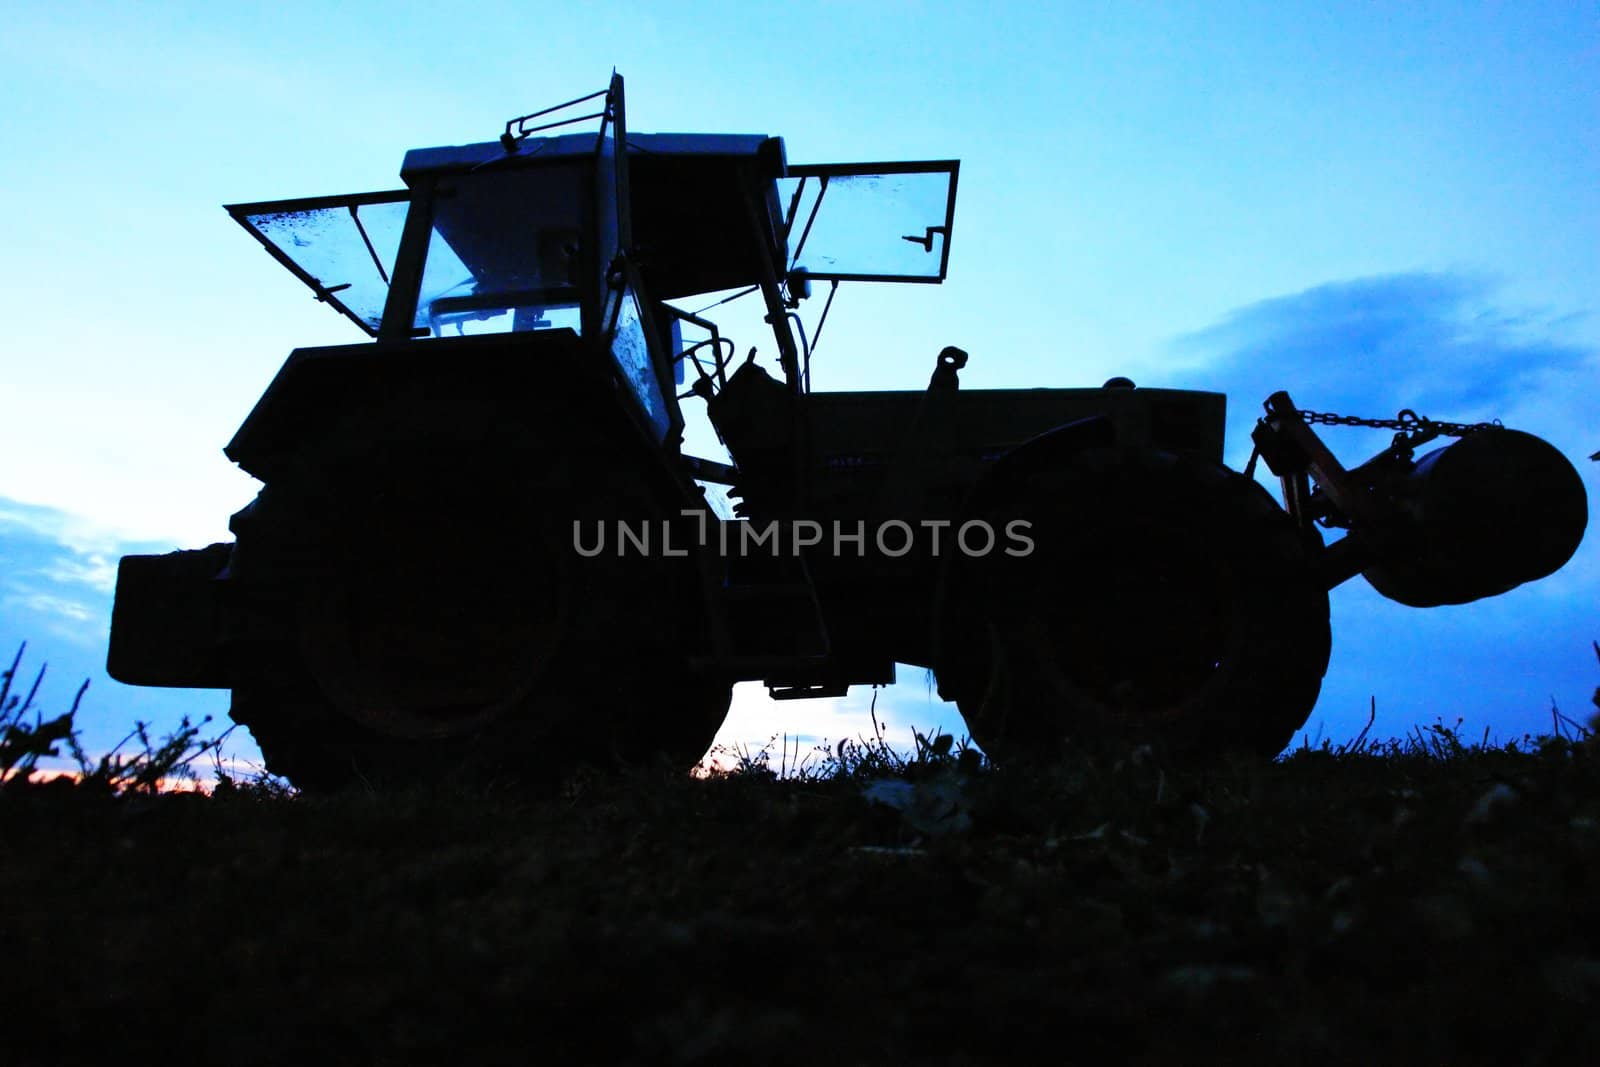 The Tractor by yucas